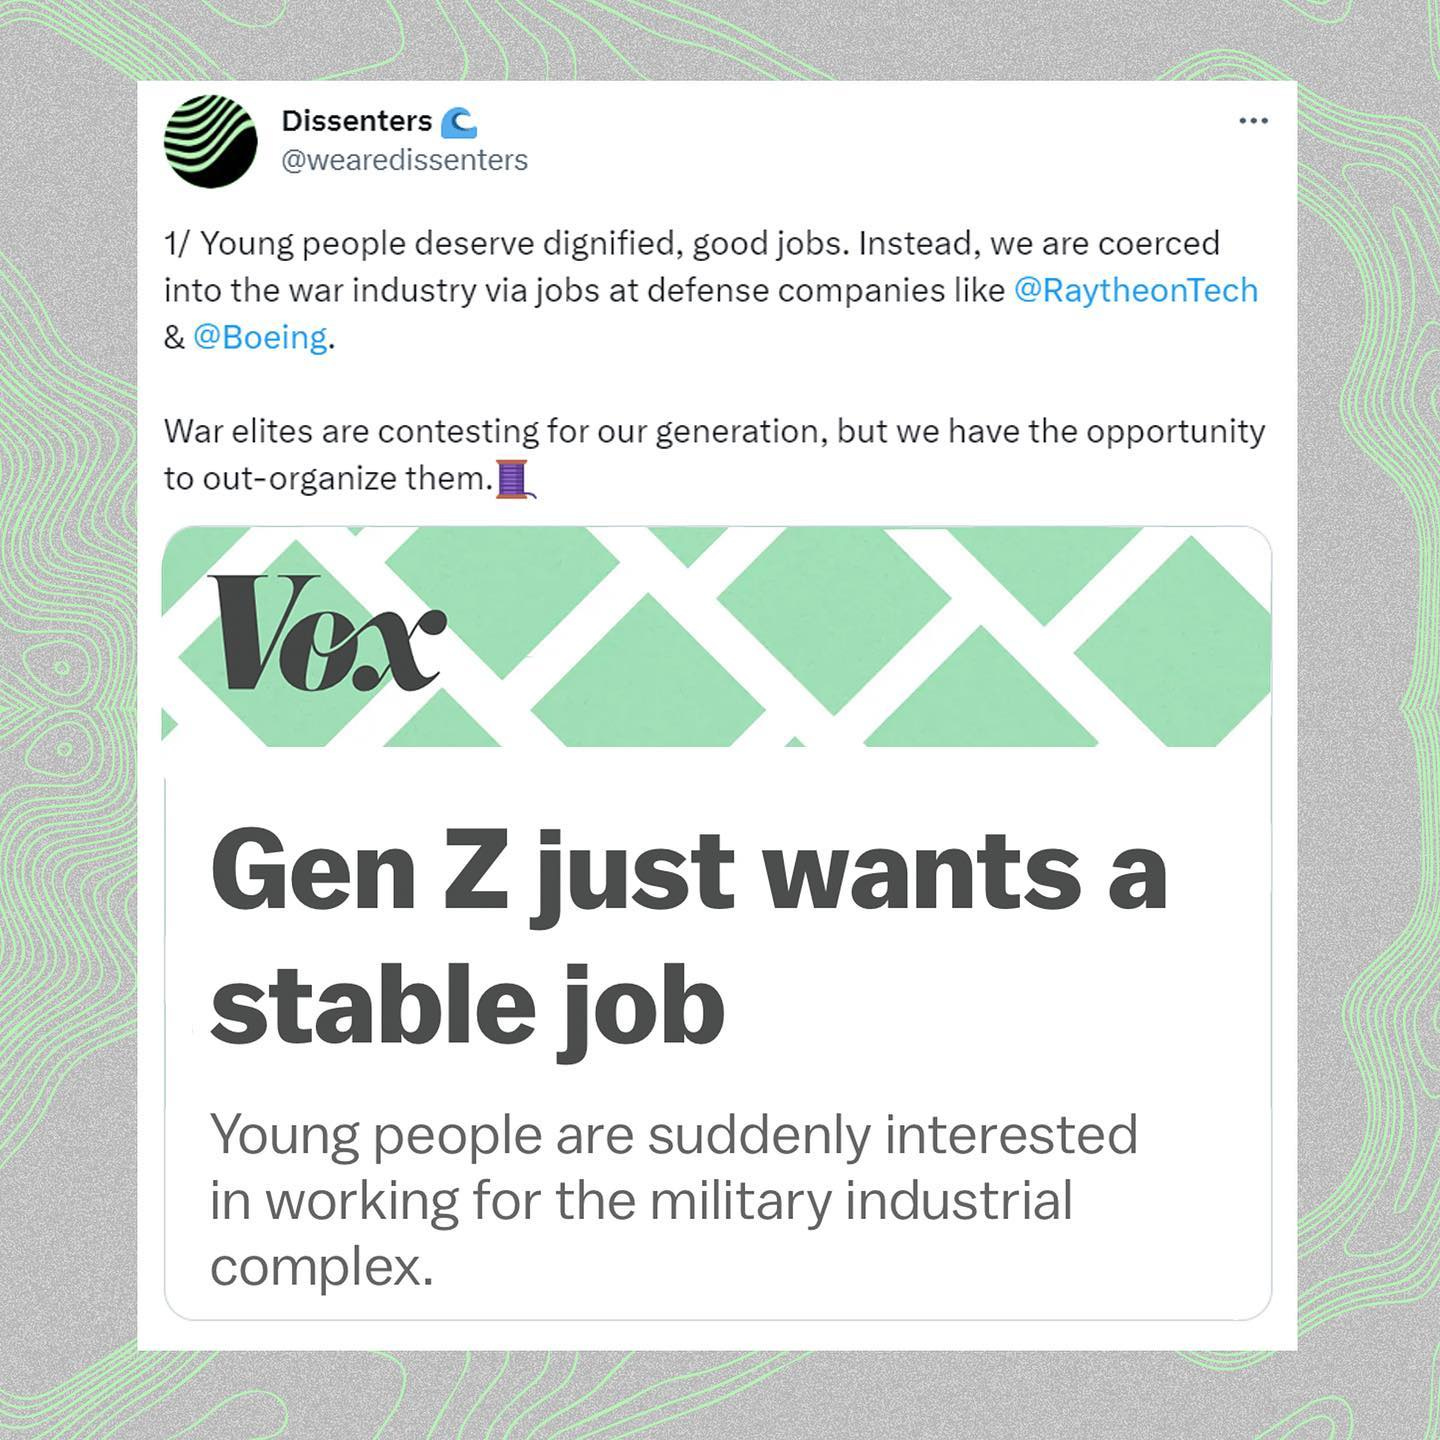 May be a graphic of magazine and text that says 'Dissenters C @wearedissenters 1/ Young people deserve dignified, goodjobs. good Instead, we are coerced into the war industry via jobs at defense companies like @RaytheonTech & @Boeing. War elites are contesting for our generation, but we have the opportunity to out-organize them. Vox Gen z just wants a stable job Young people are suddenly interested in working for the military industrial complex.'